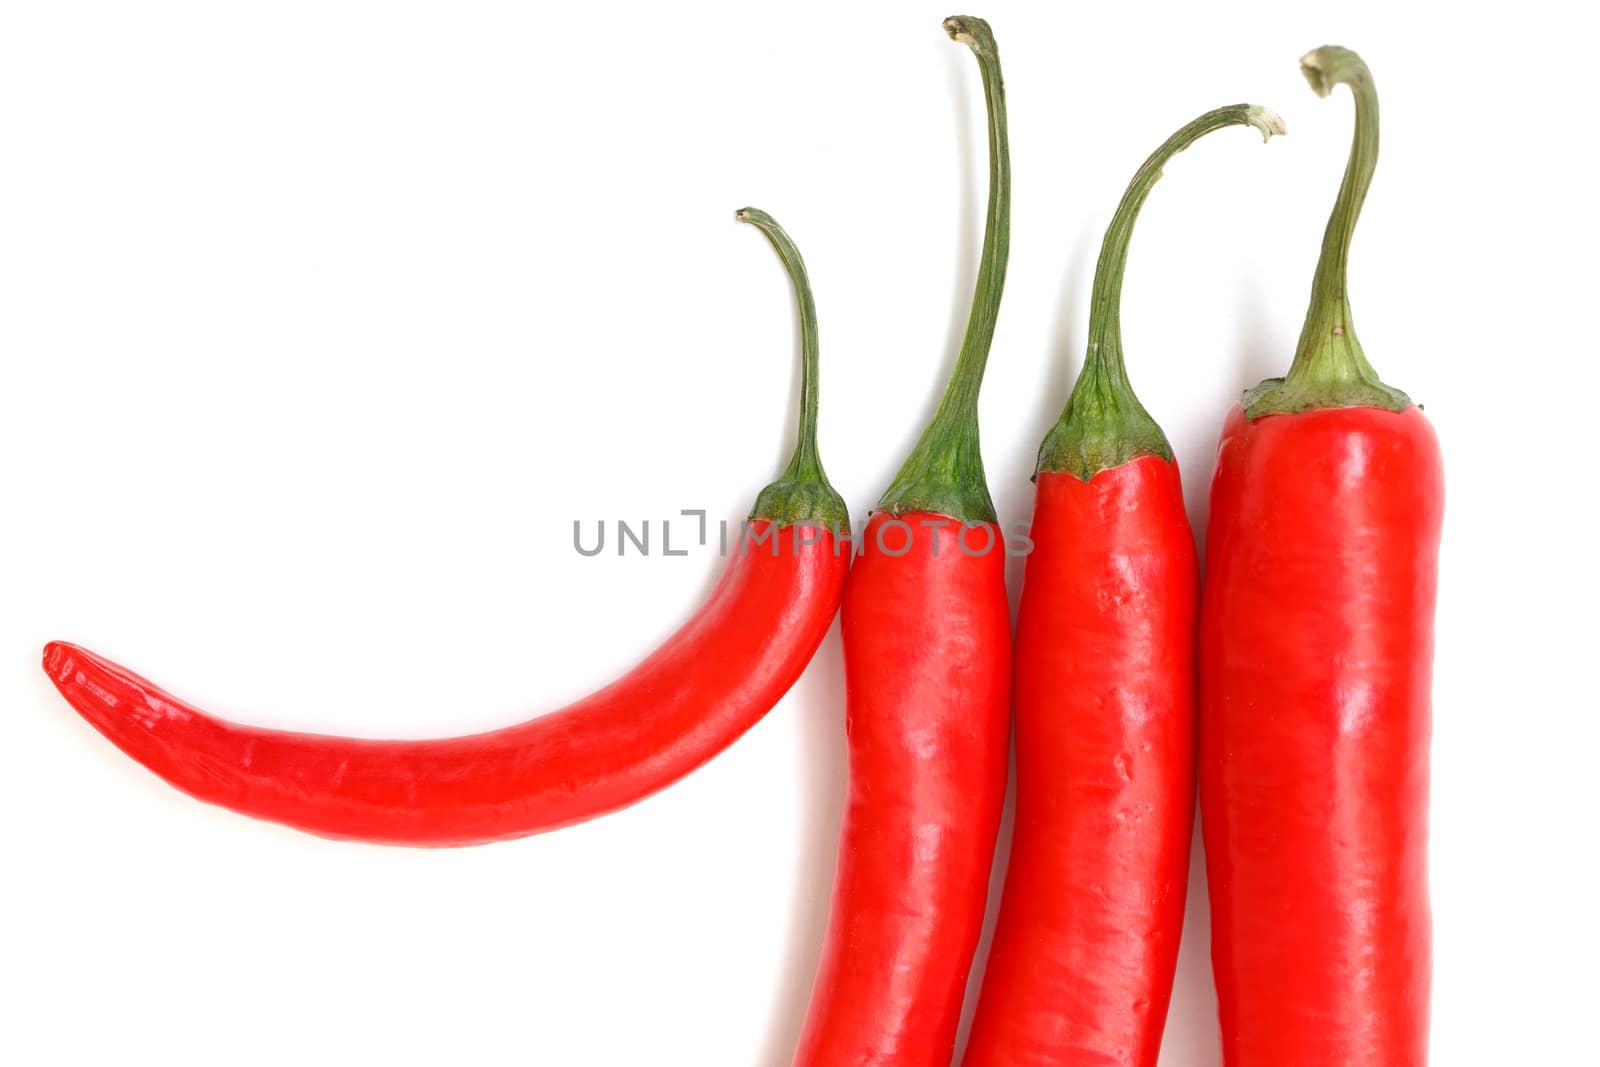 Chili pepper by Discovod